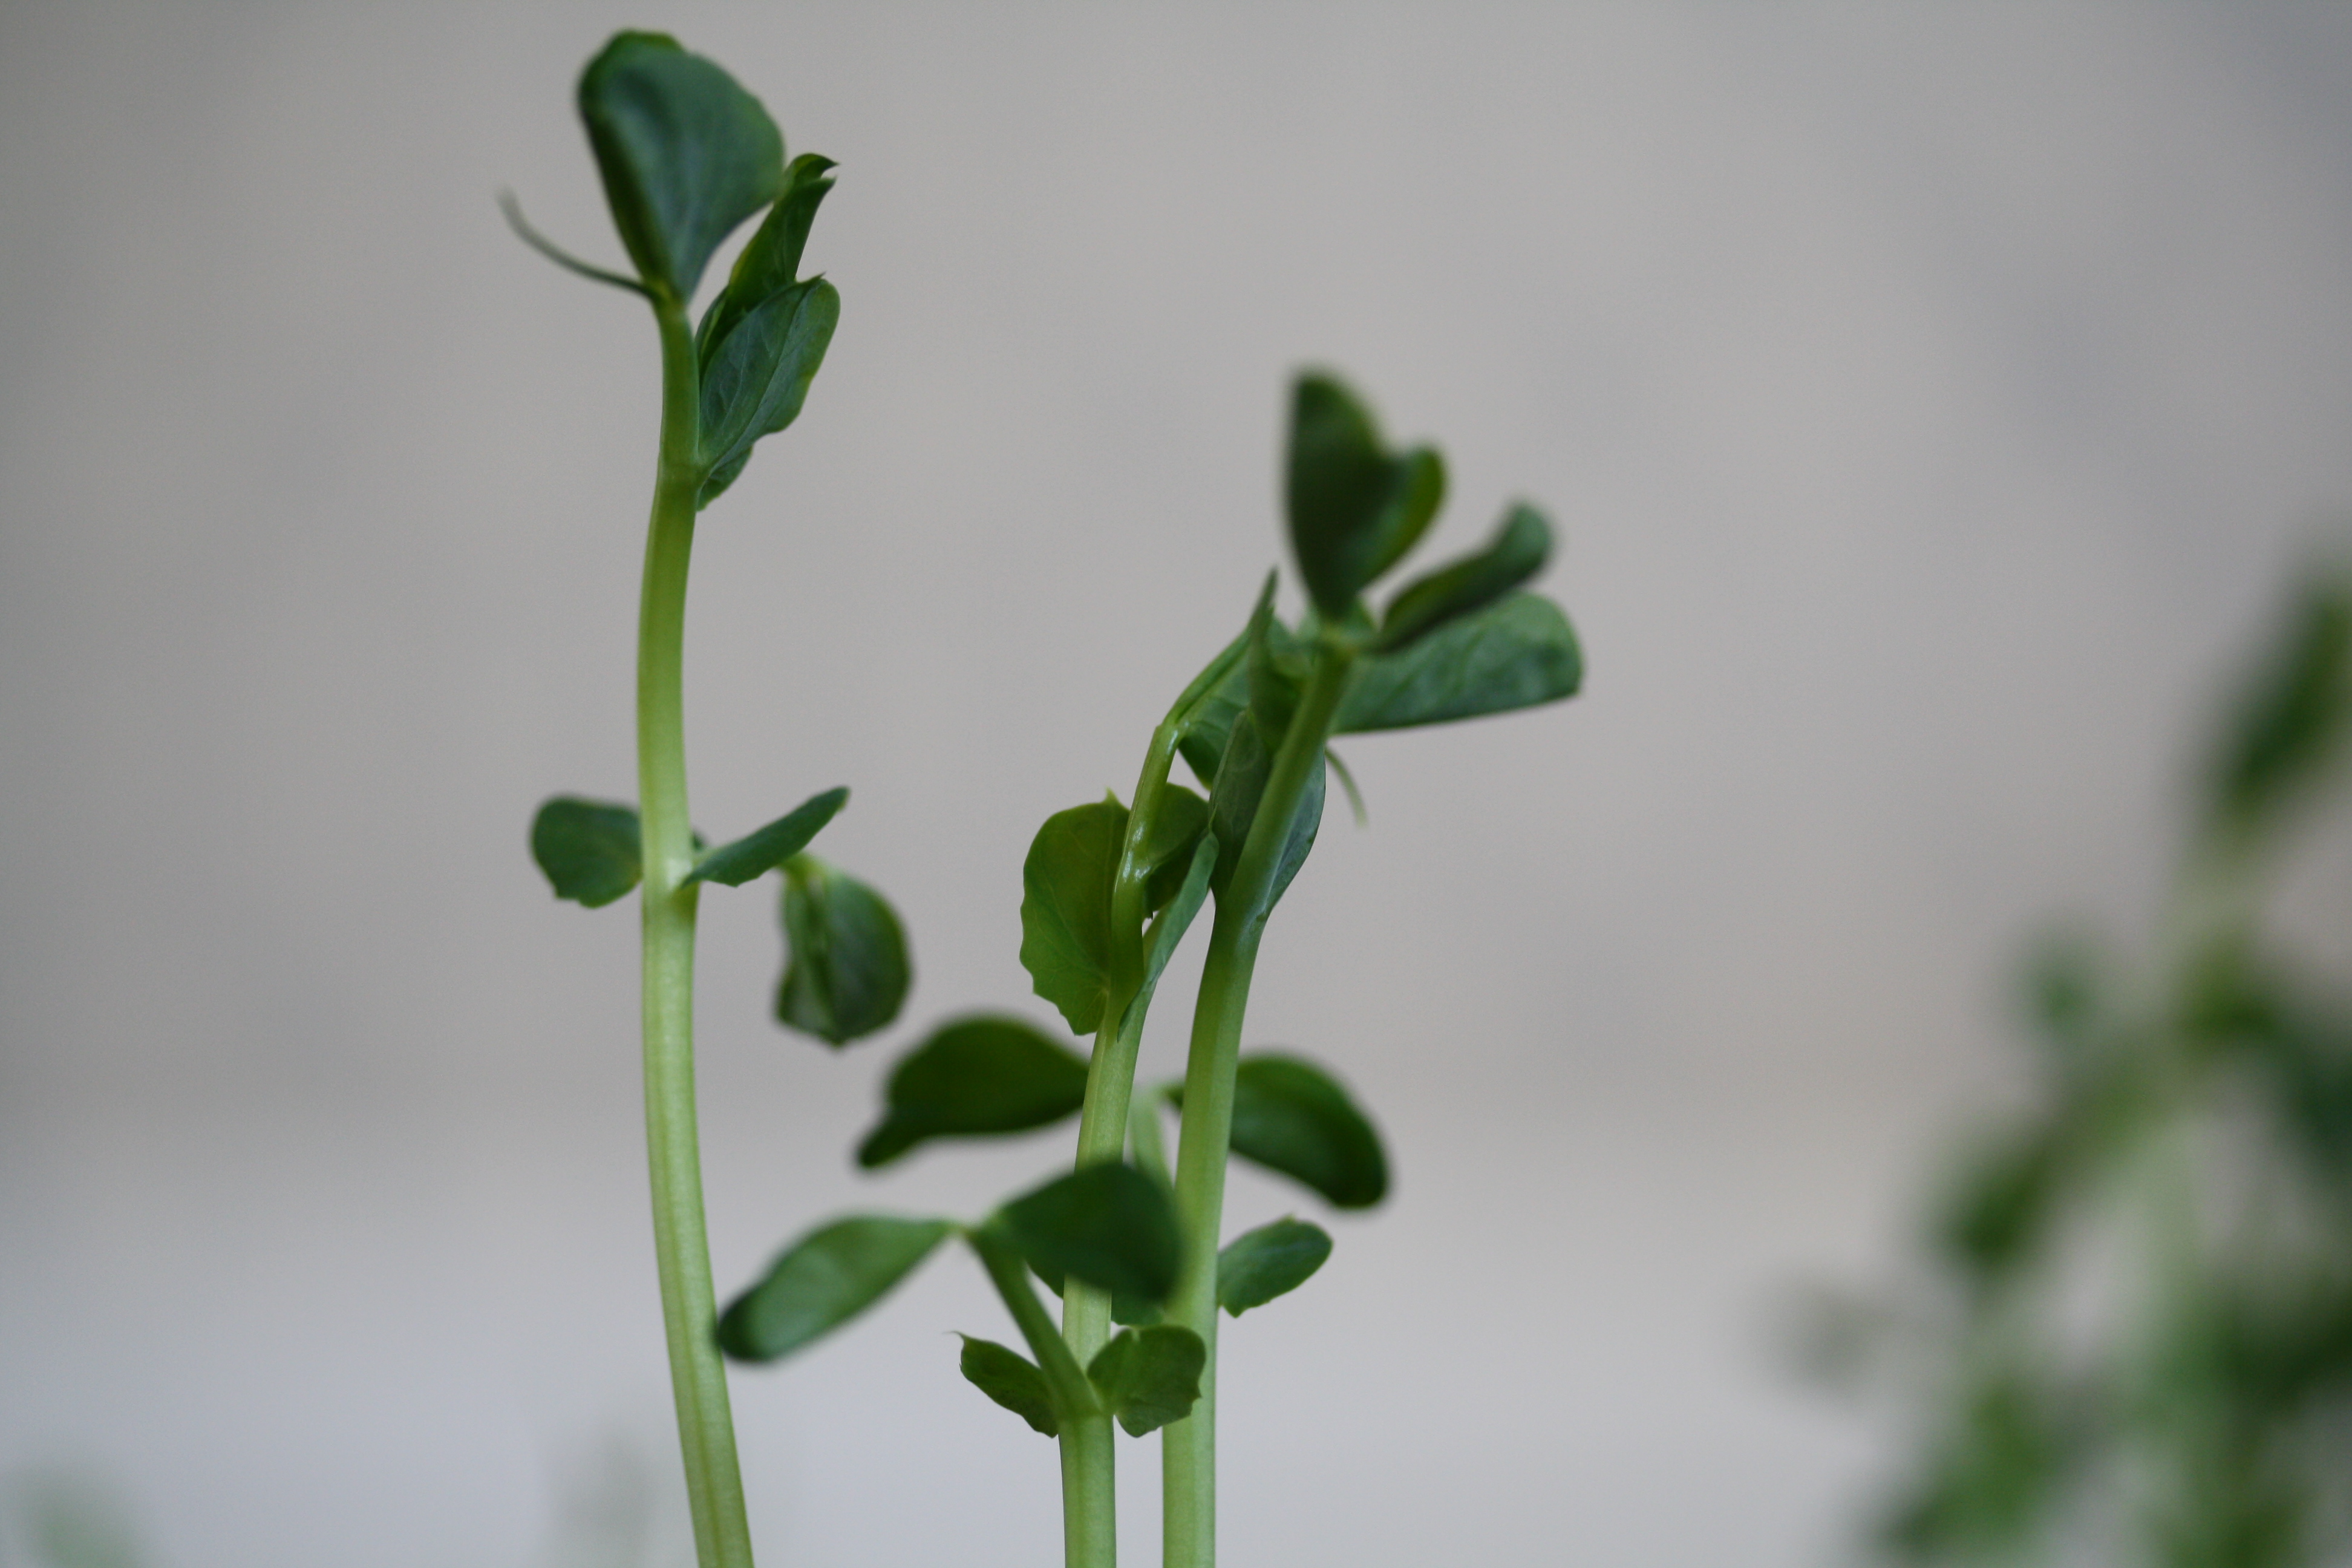 snap pea sprouts